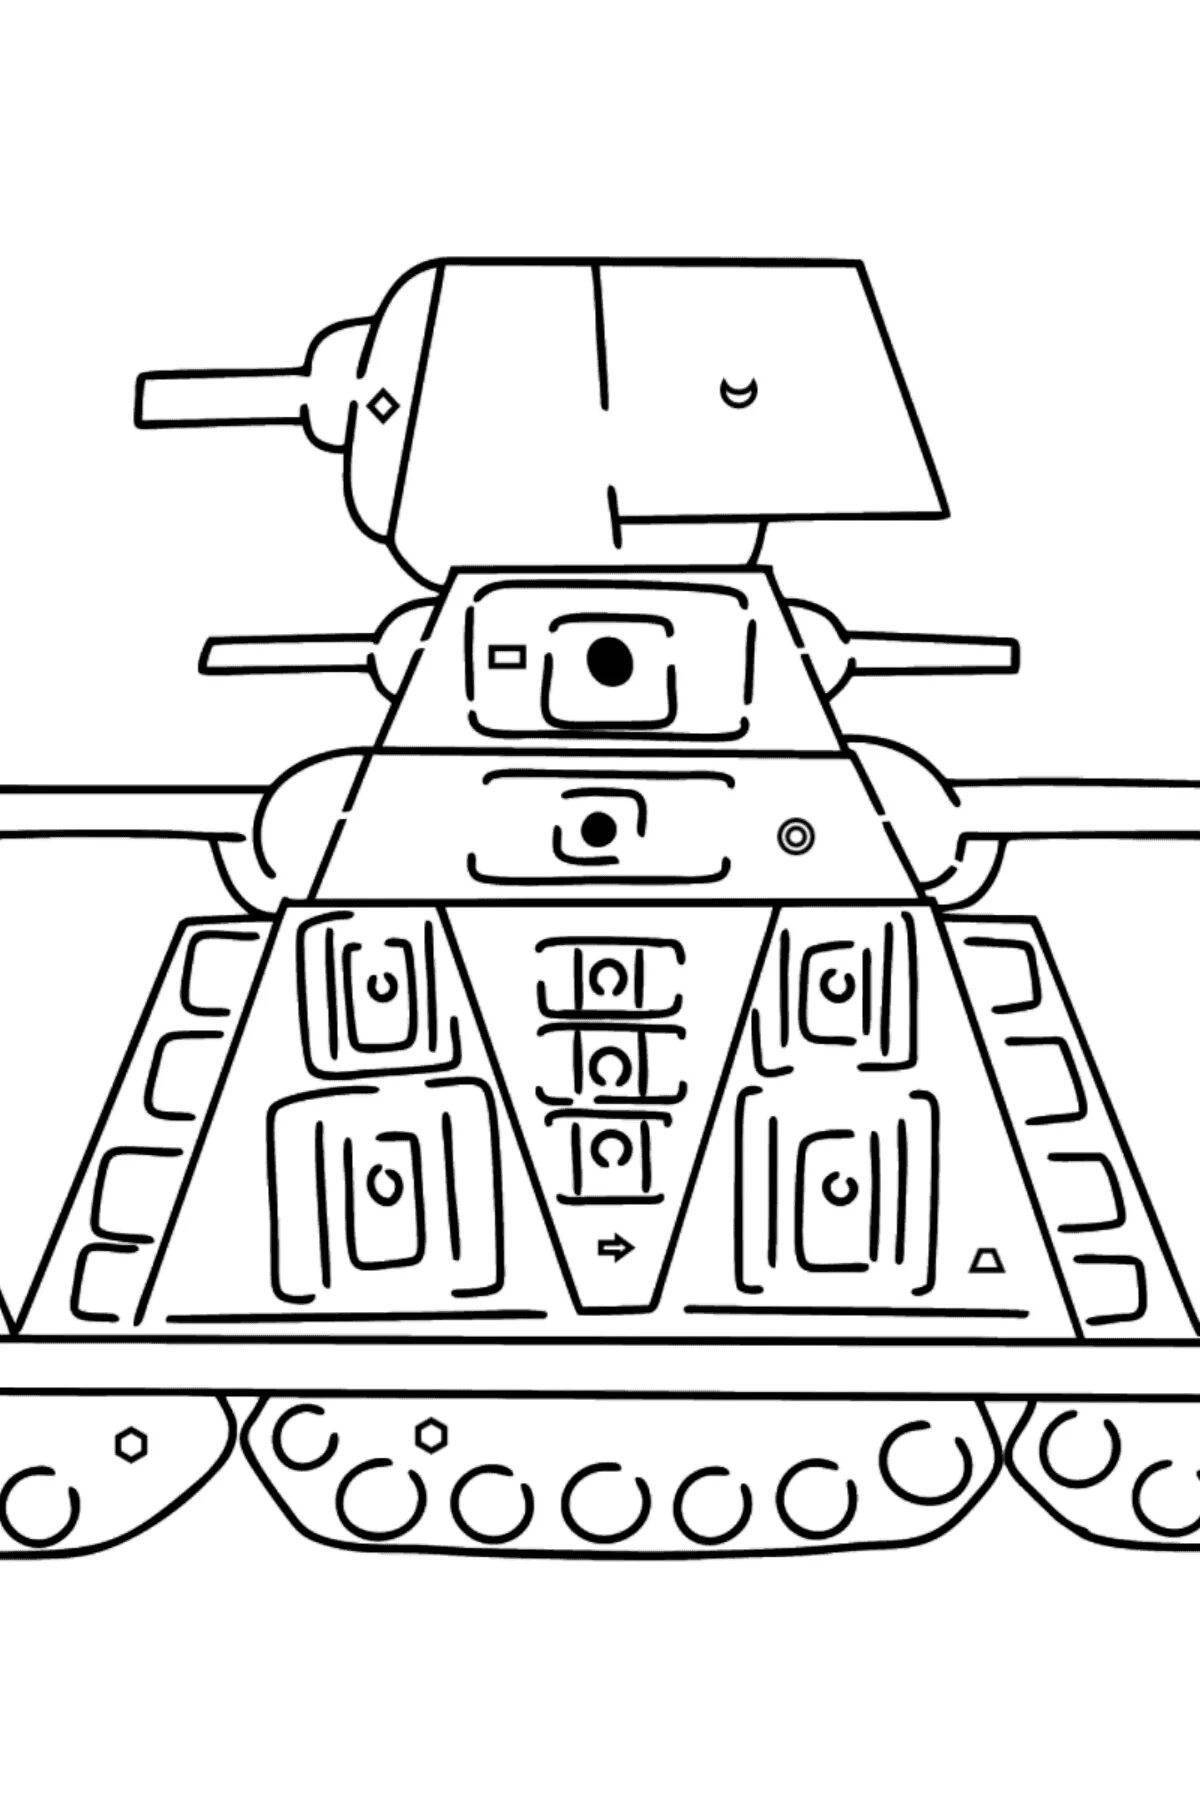 Attractive k44 tank coloring page